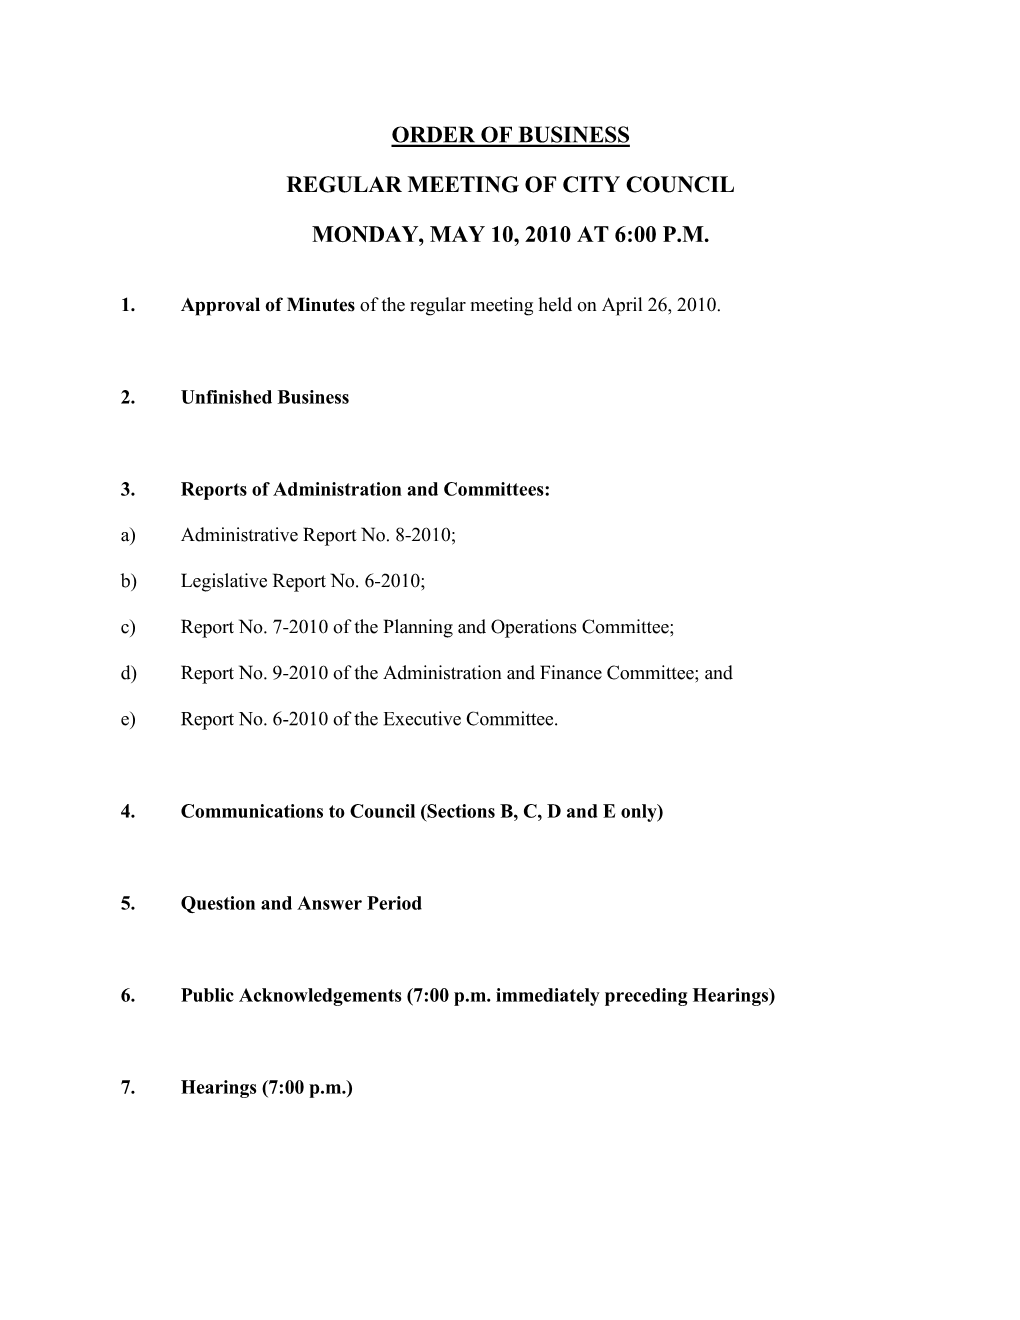 Order of Business Regular Meeting of City Council Monday, May 10, 2010